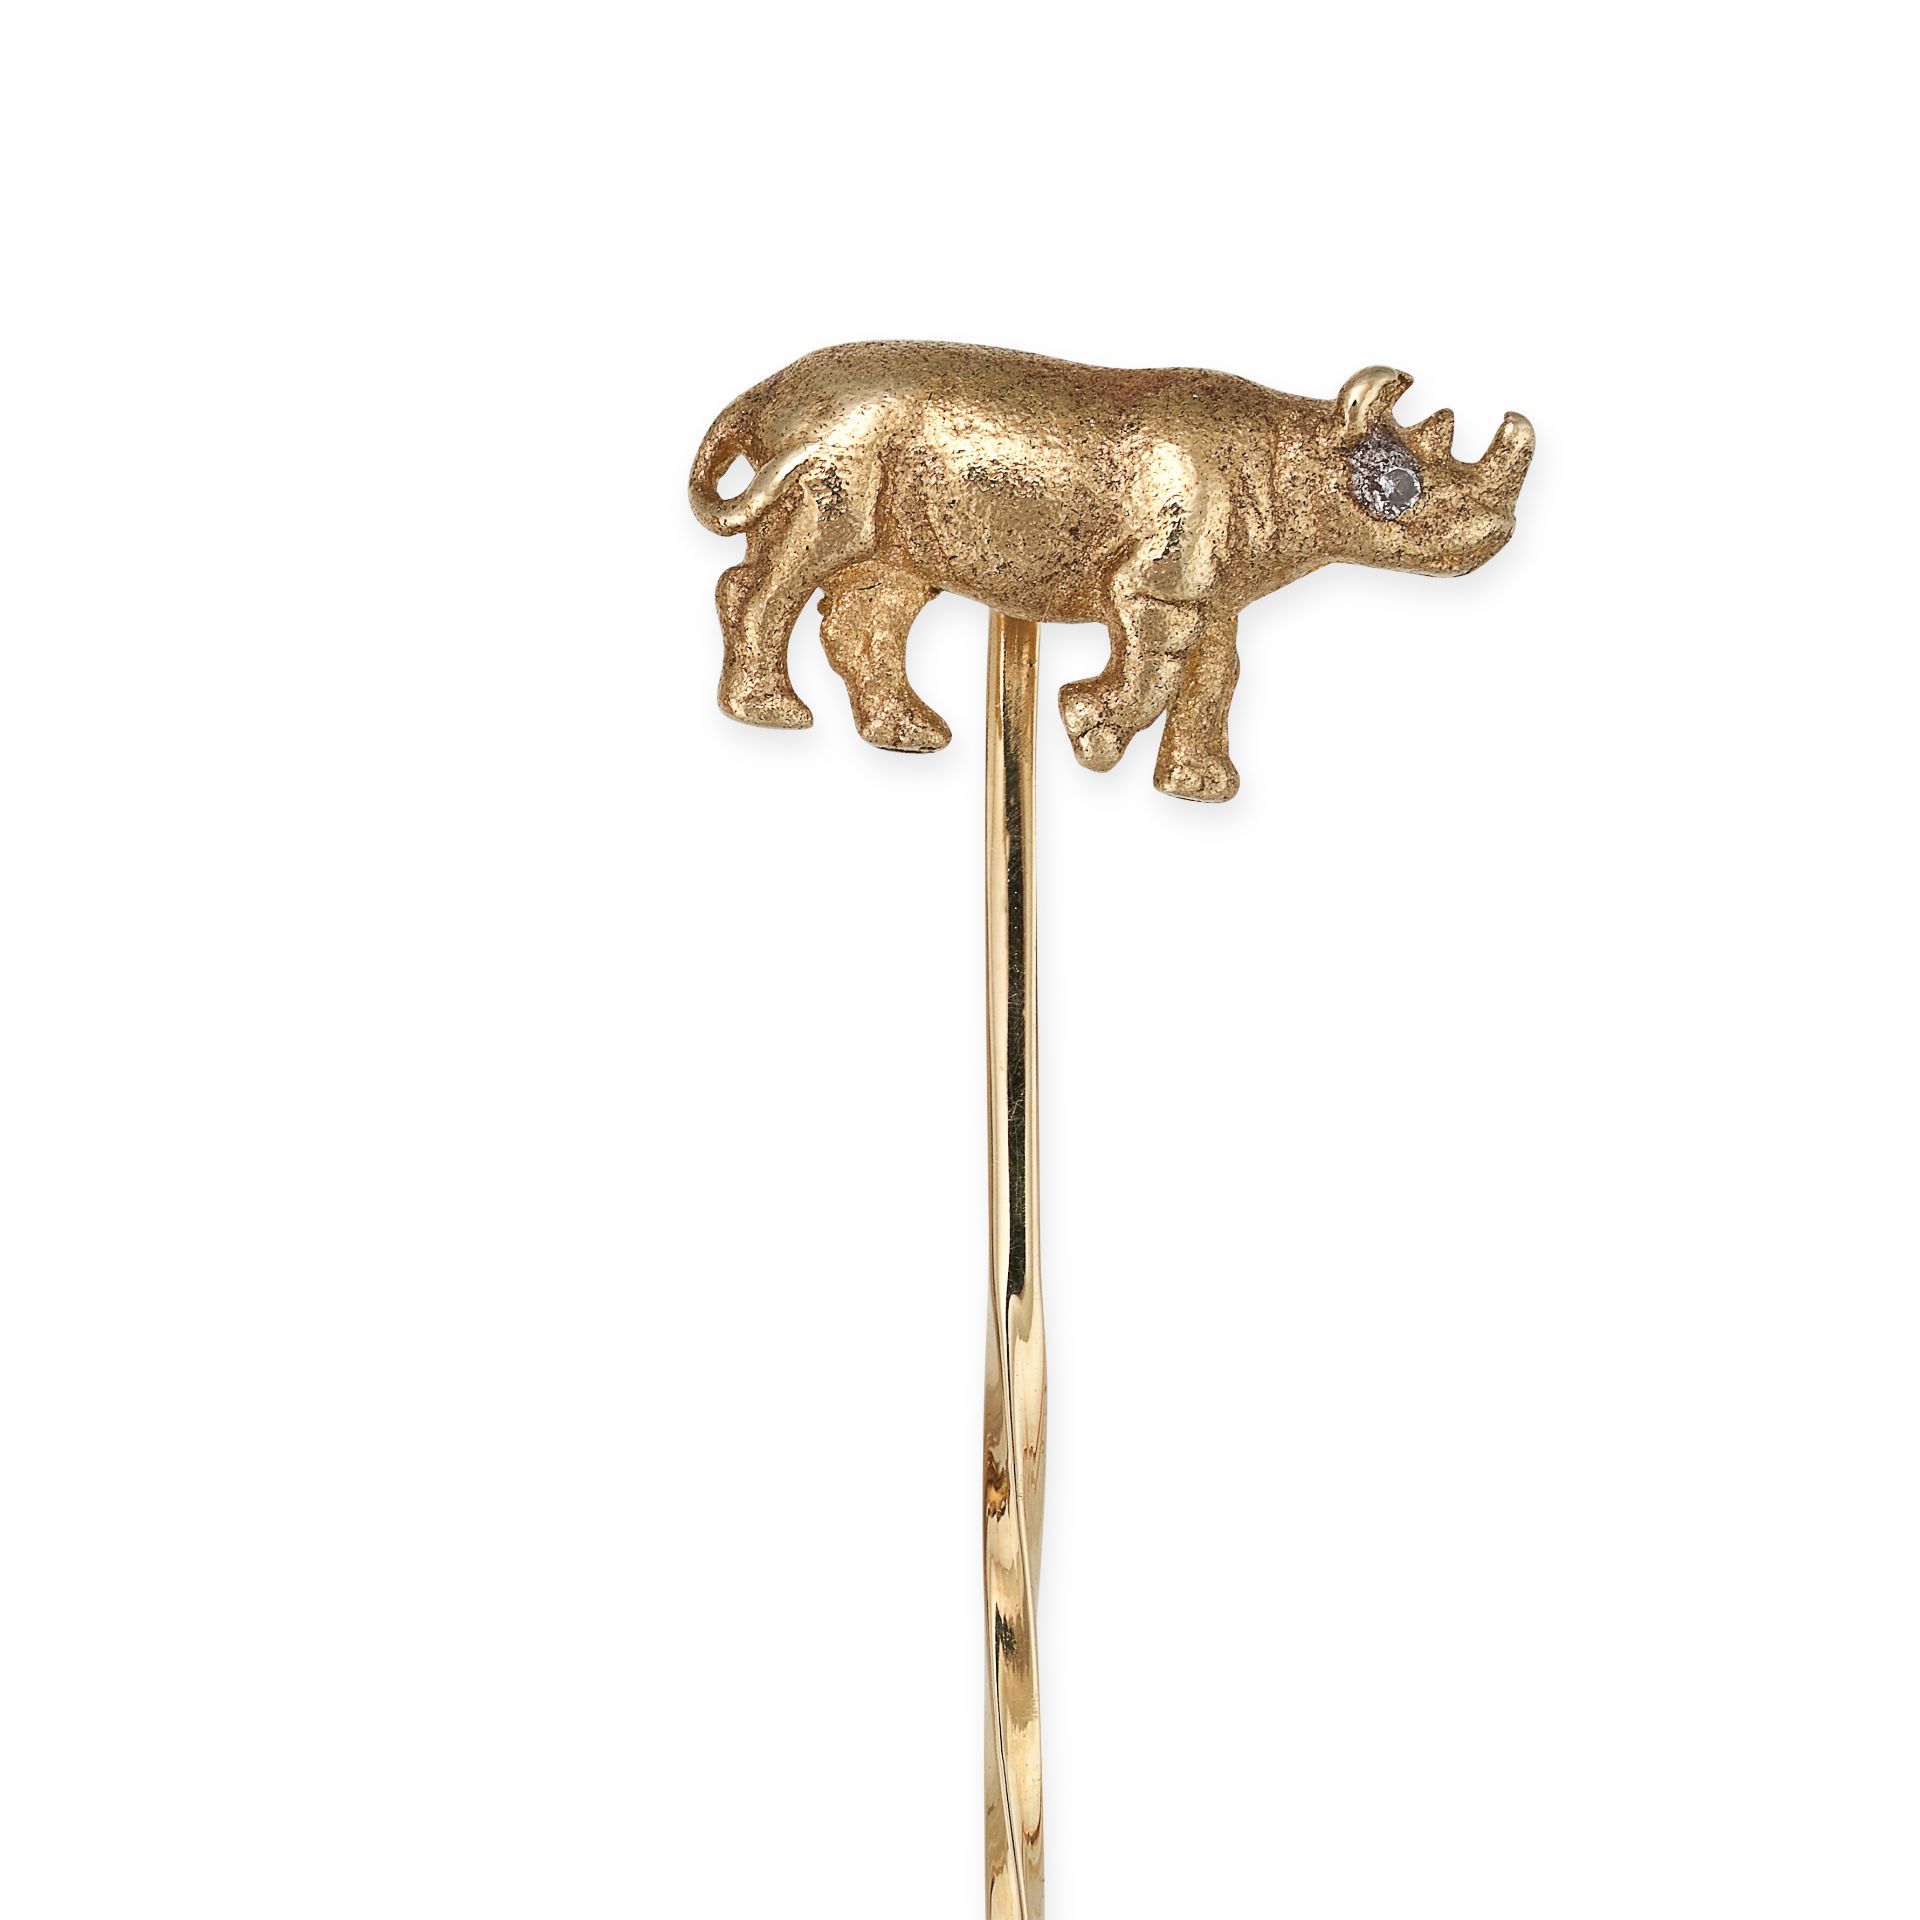 A DIAMOND RHINOCEROS STICK / TIE PIN in yellow gold, designed as a rhinoceros, the eye set with a...